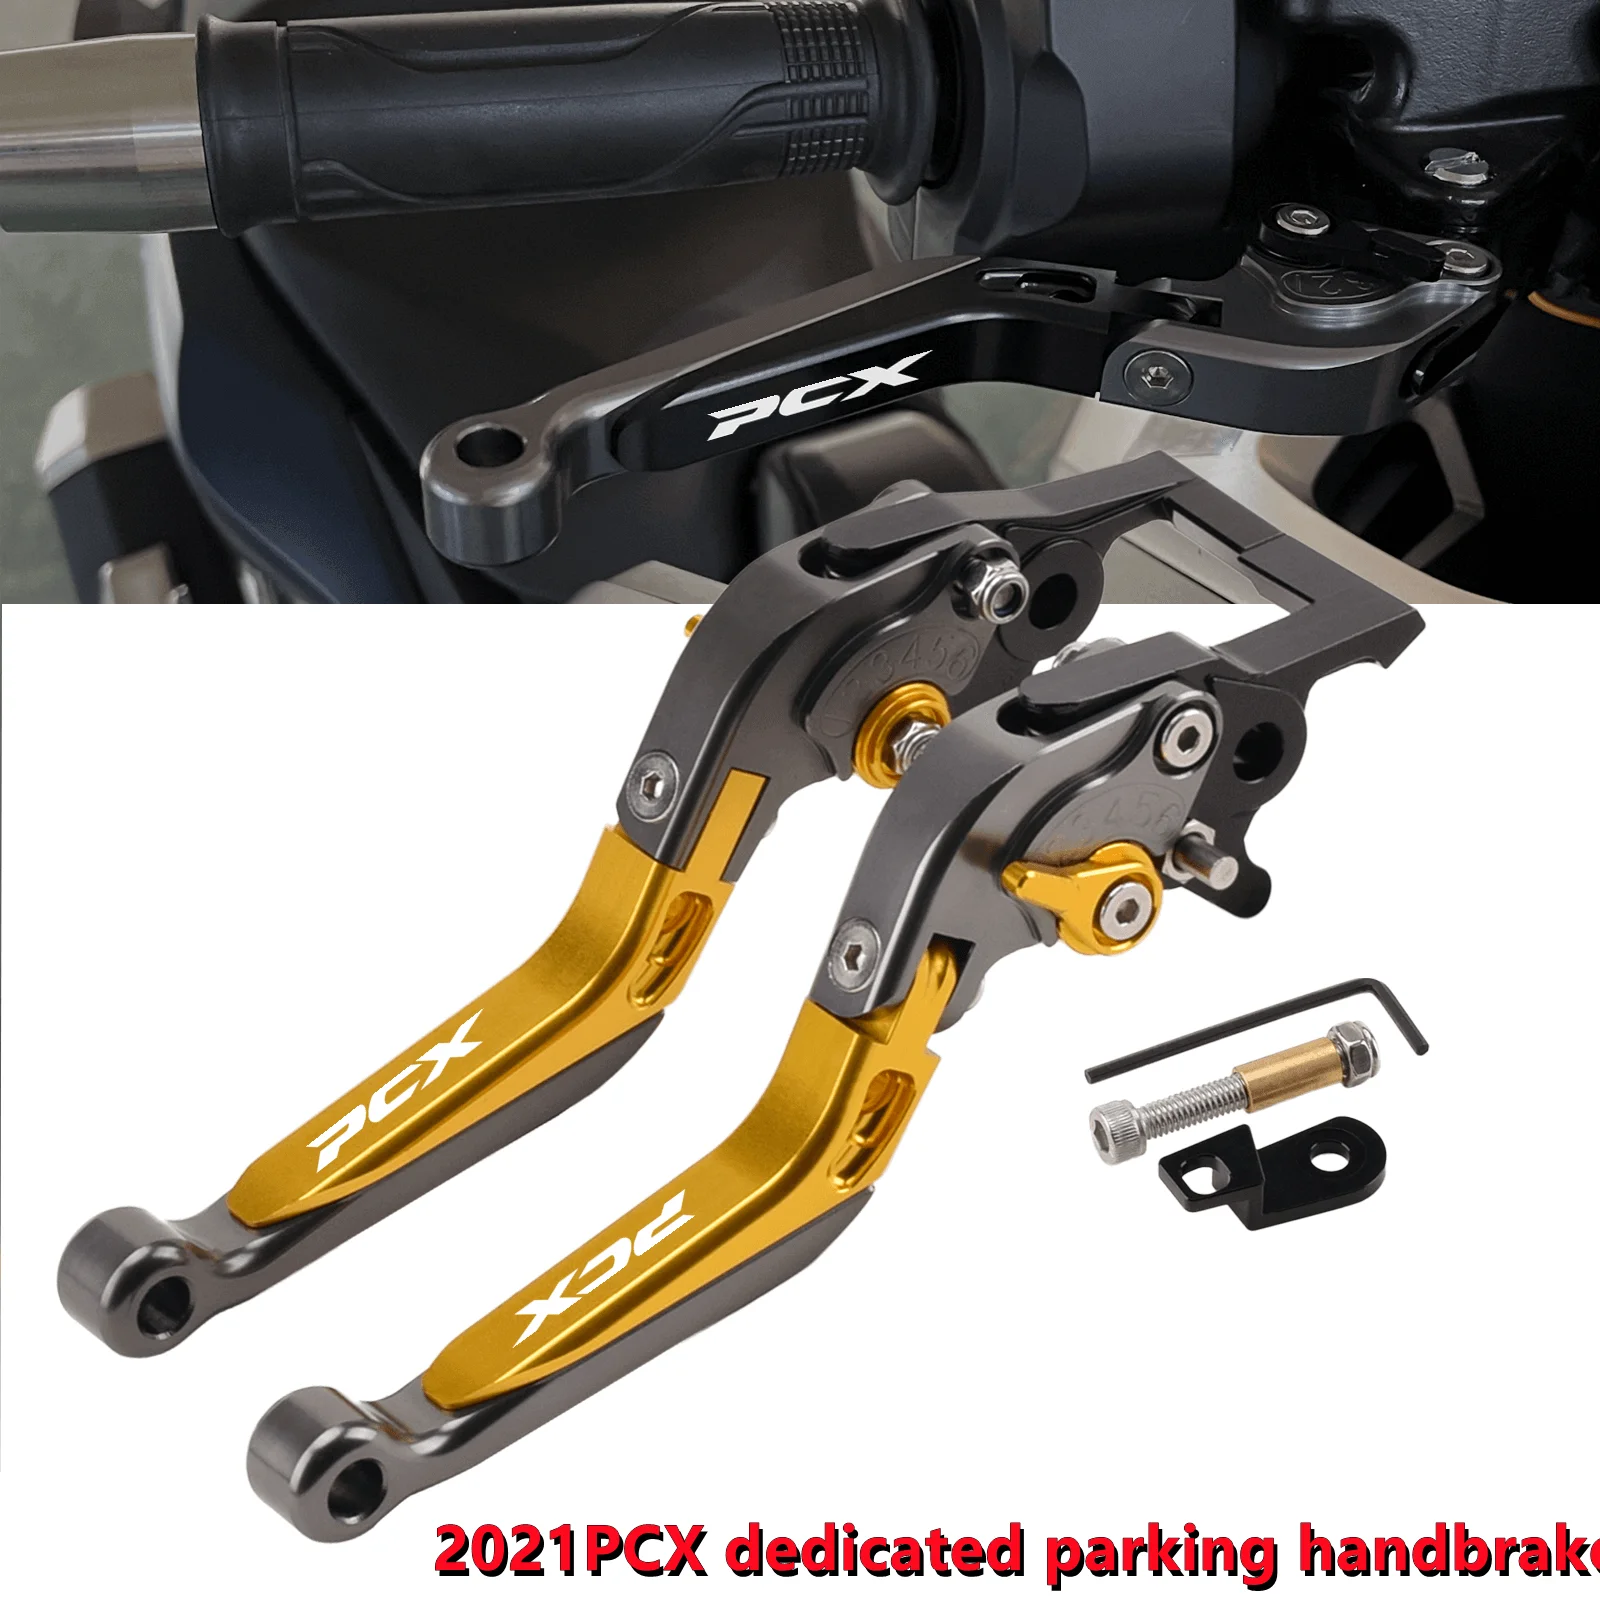 

For HONDA PCX160 PCX 125 150 160 ABS Double Disc Brake Motorcycle Accessories Modified Foldable with Parking Function Brake